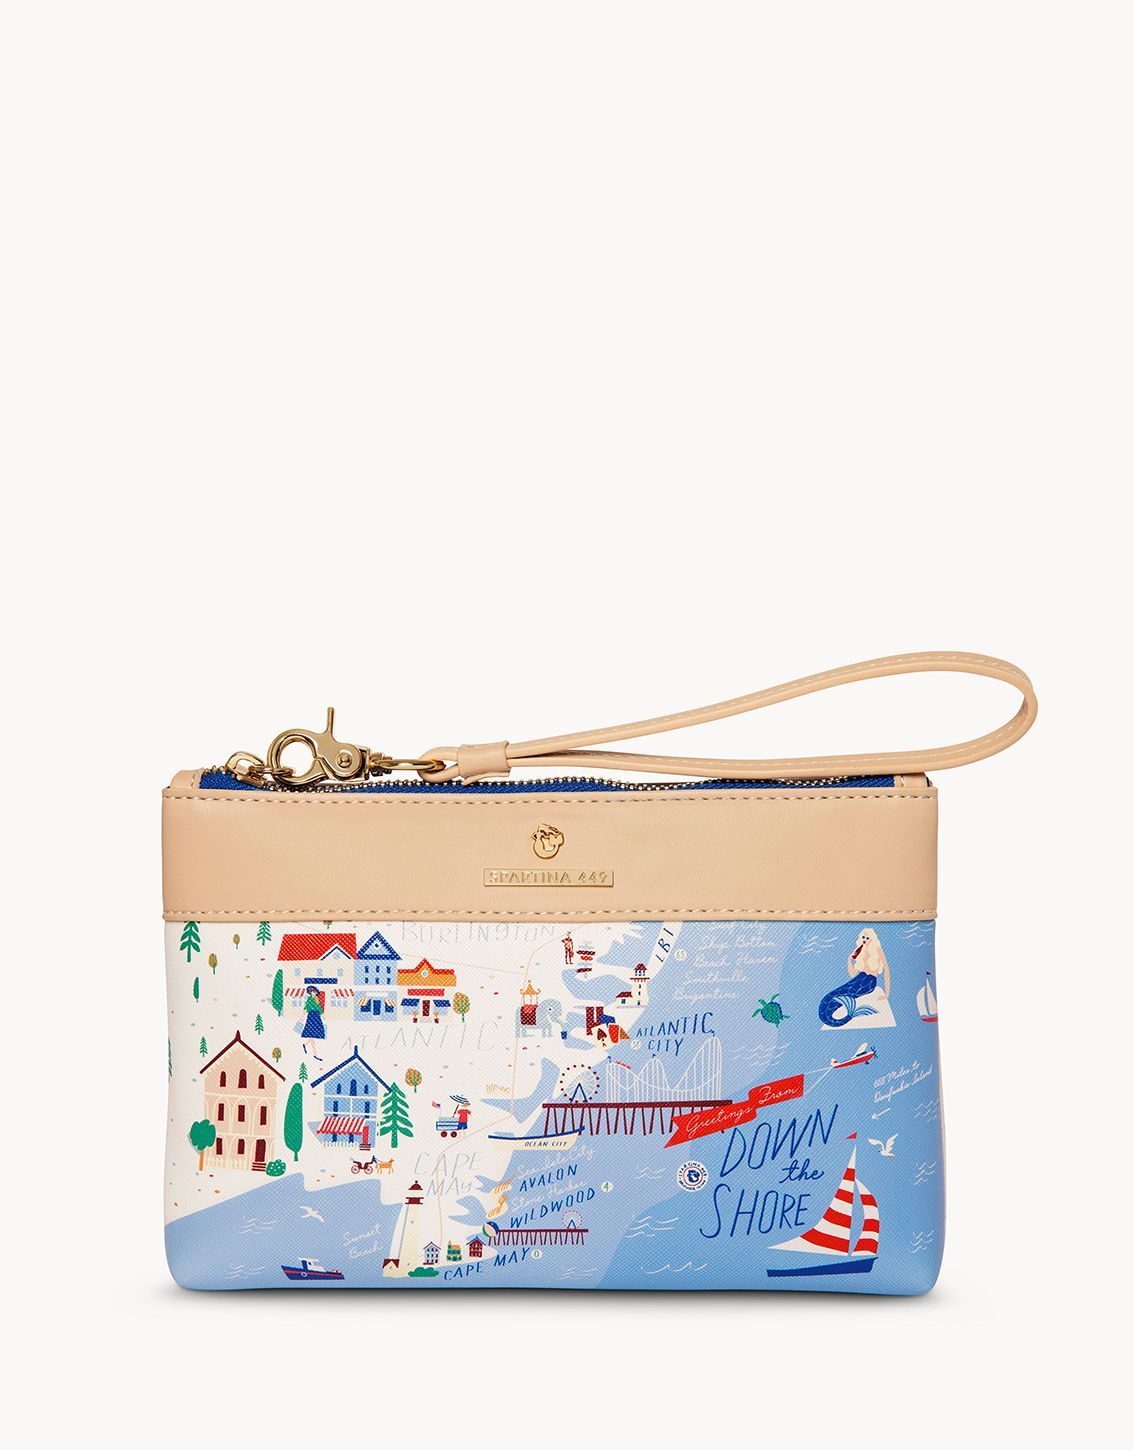 Spartina Spartina Down The Shore Wristlet available at The Good Life Boutique